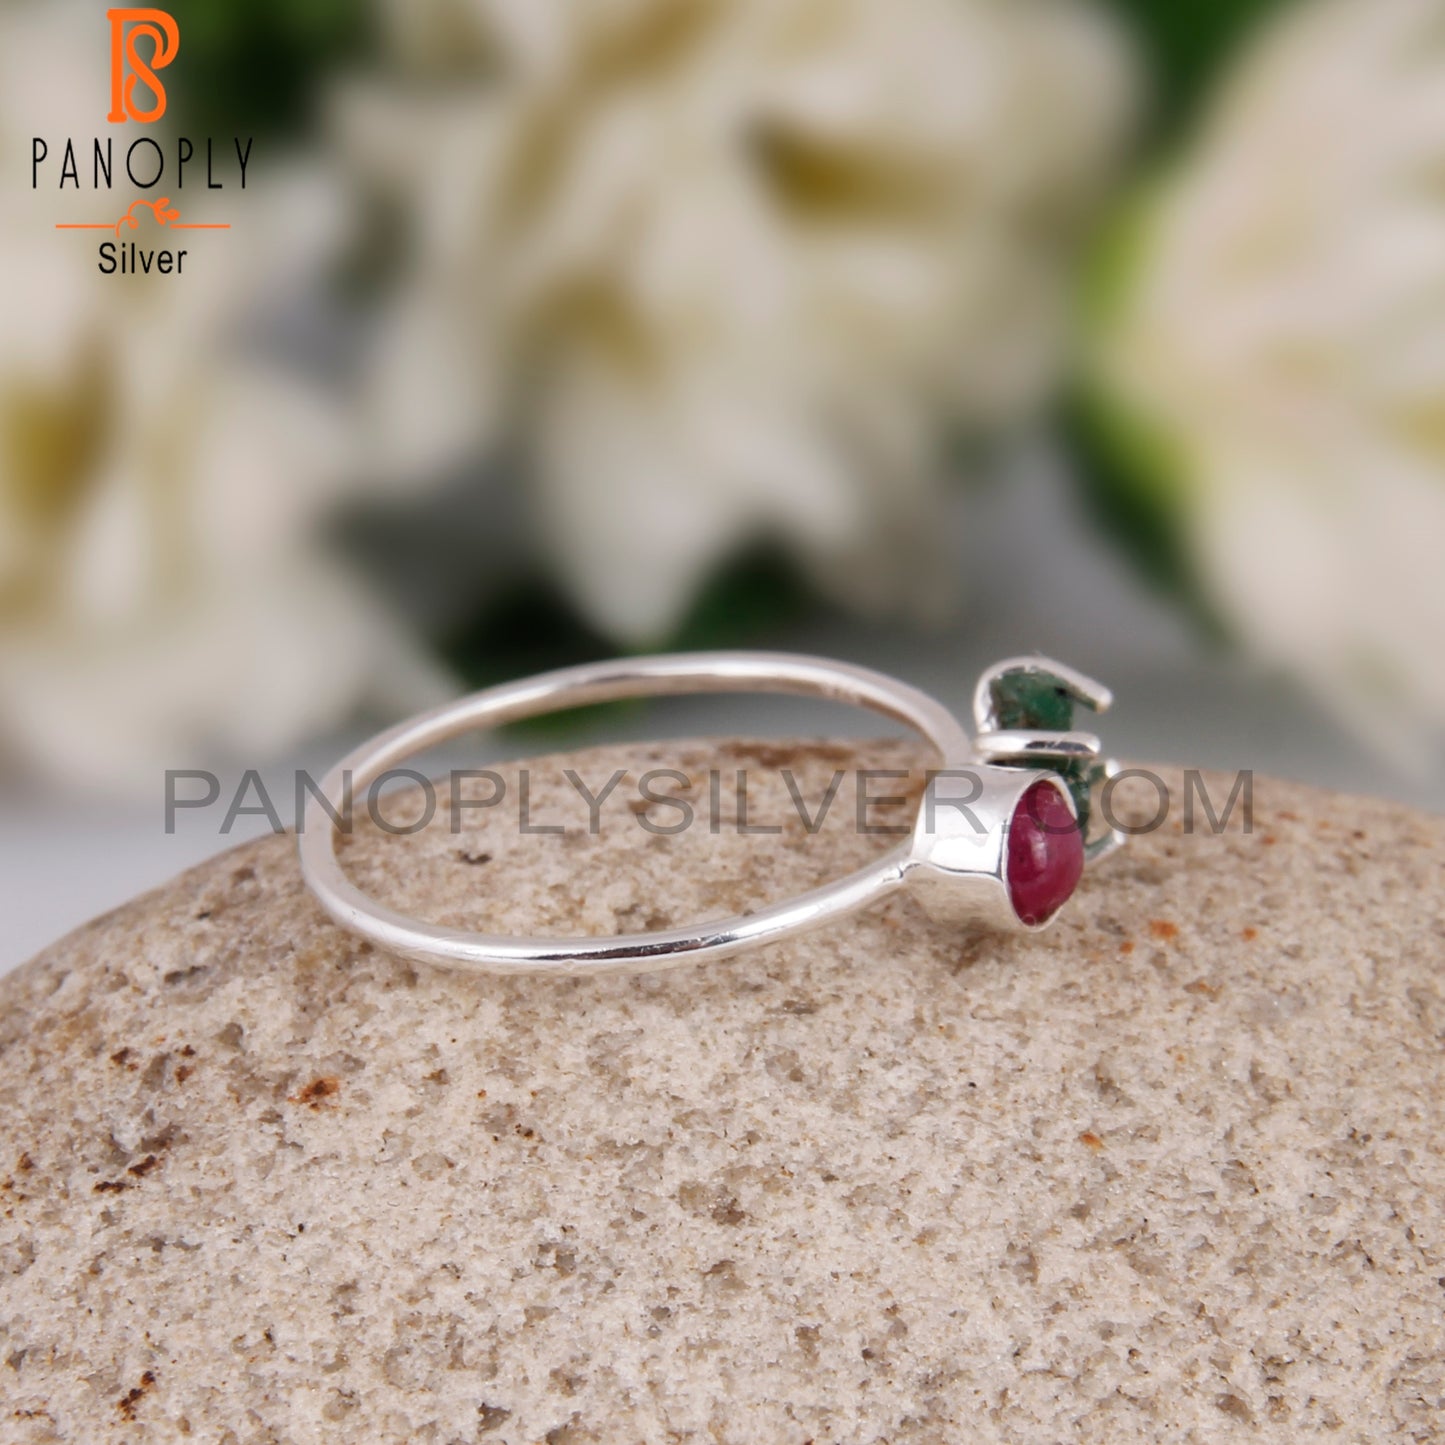 Ruby & Emerald 925 Sterling Silver Ring